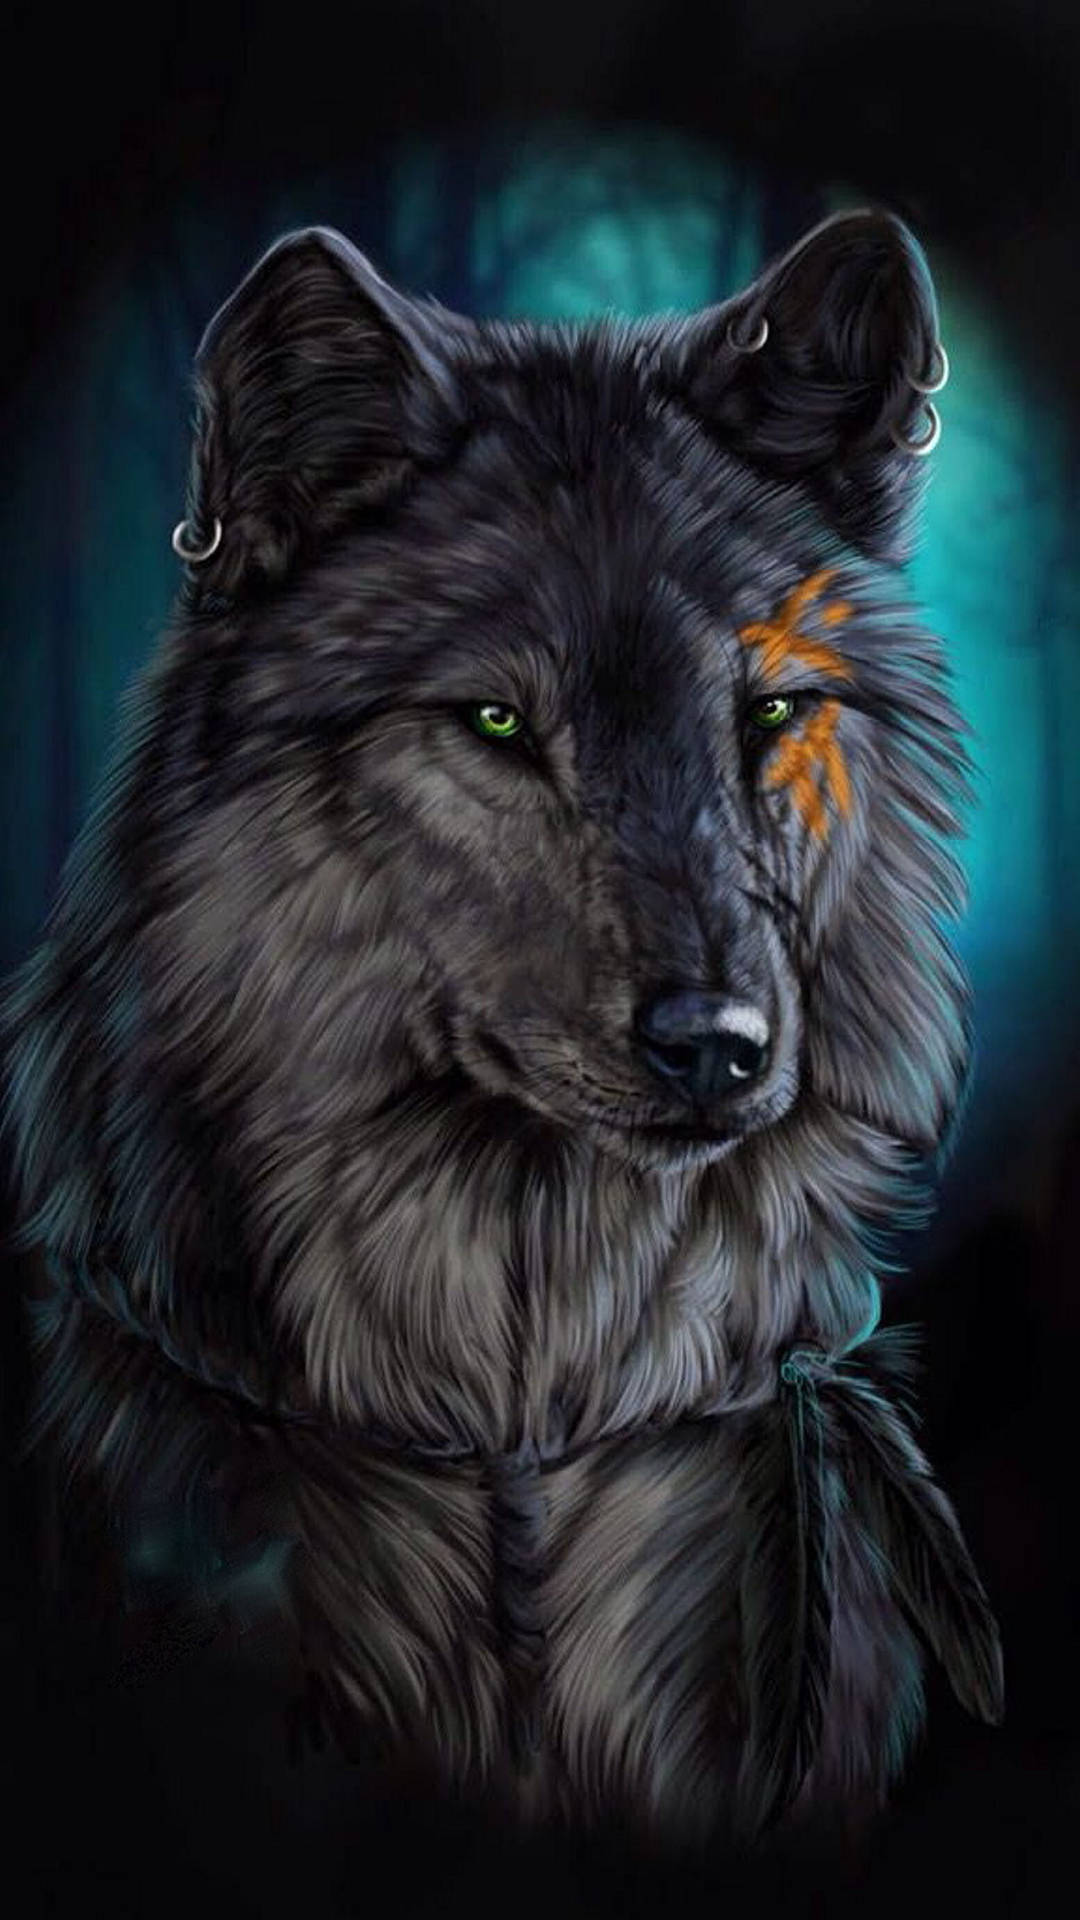 Gray And Black Wolf In Blue